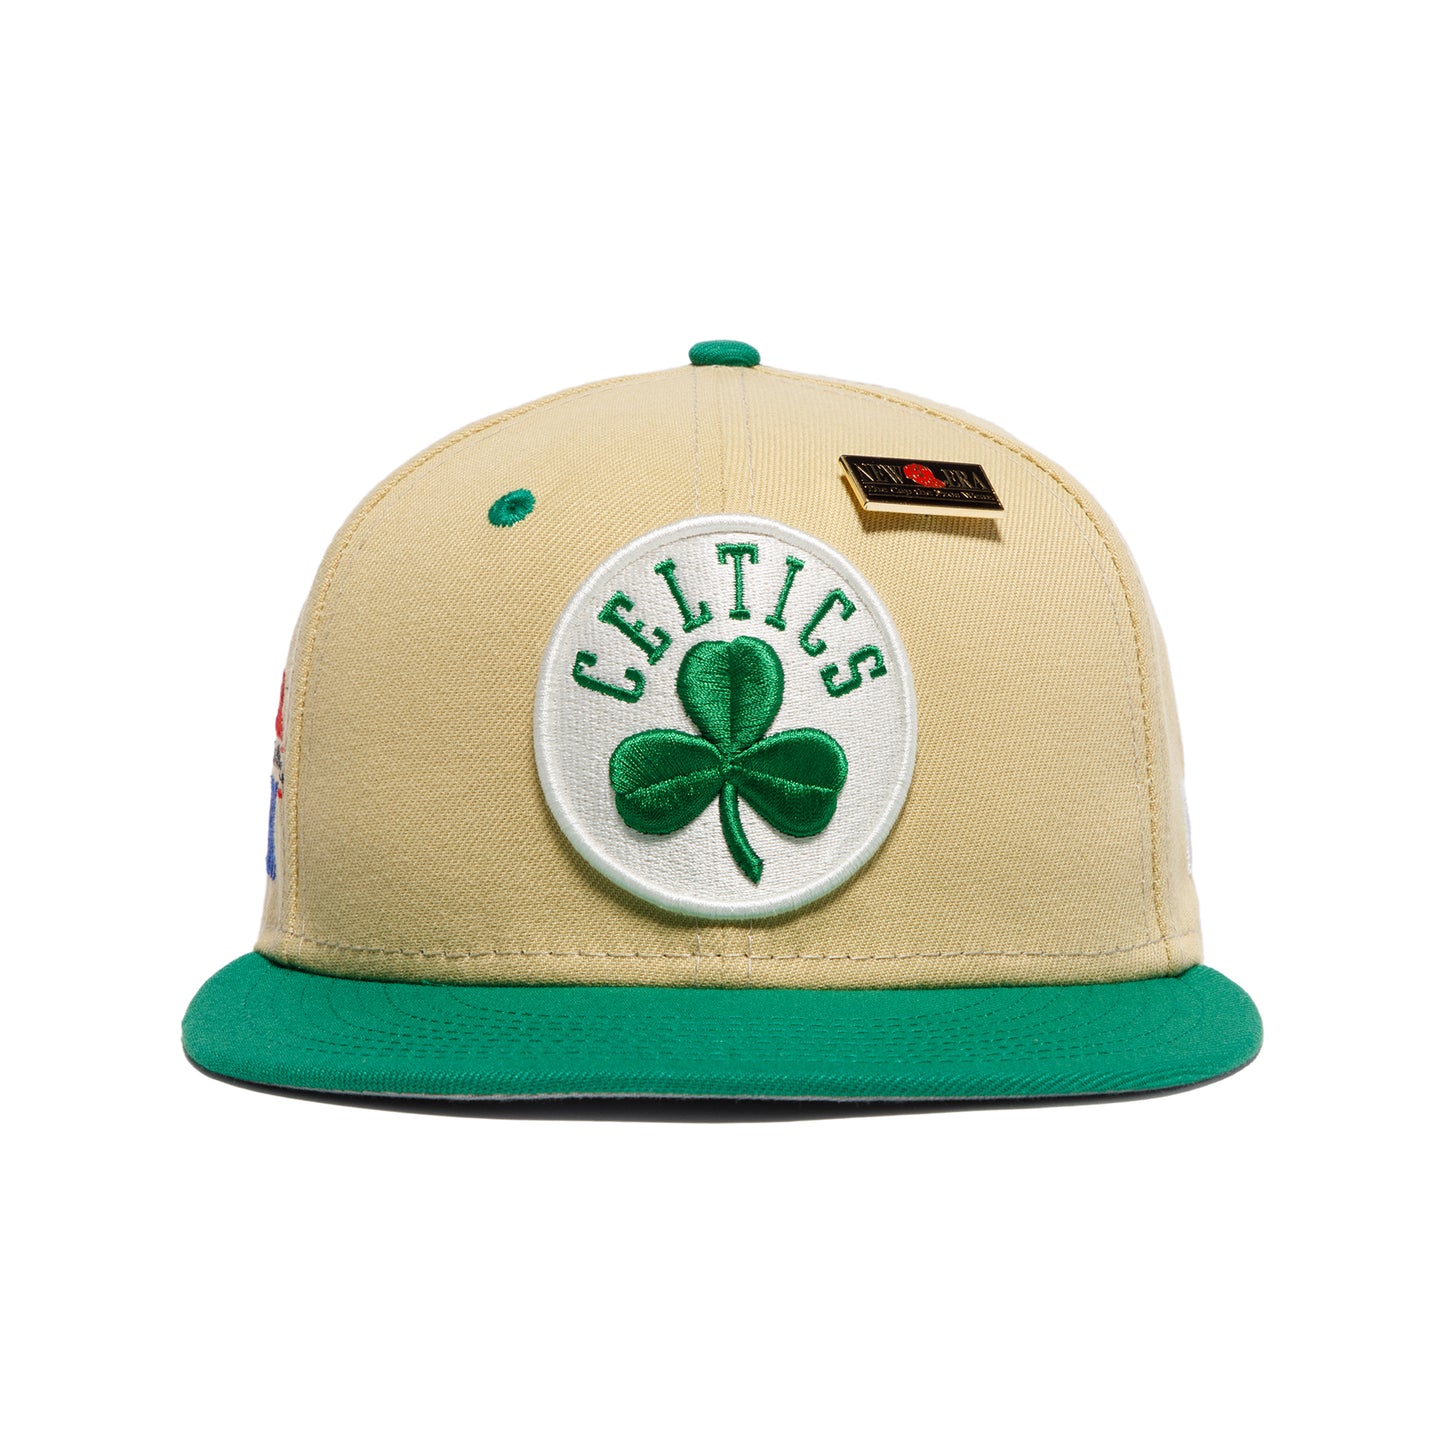 New Era Boston Celtics 59Fifty Fitted Hat (Vintage Green)